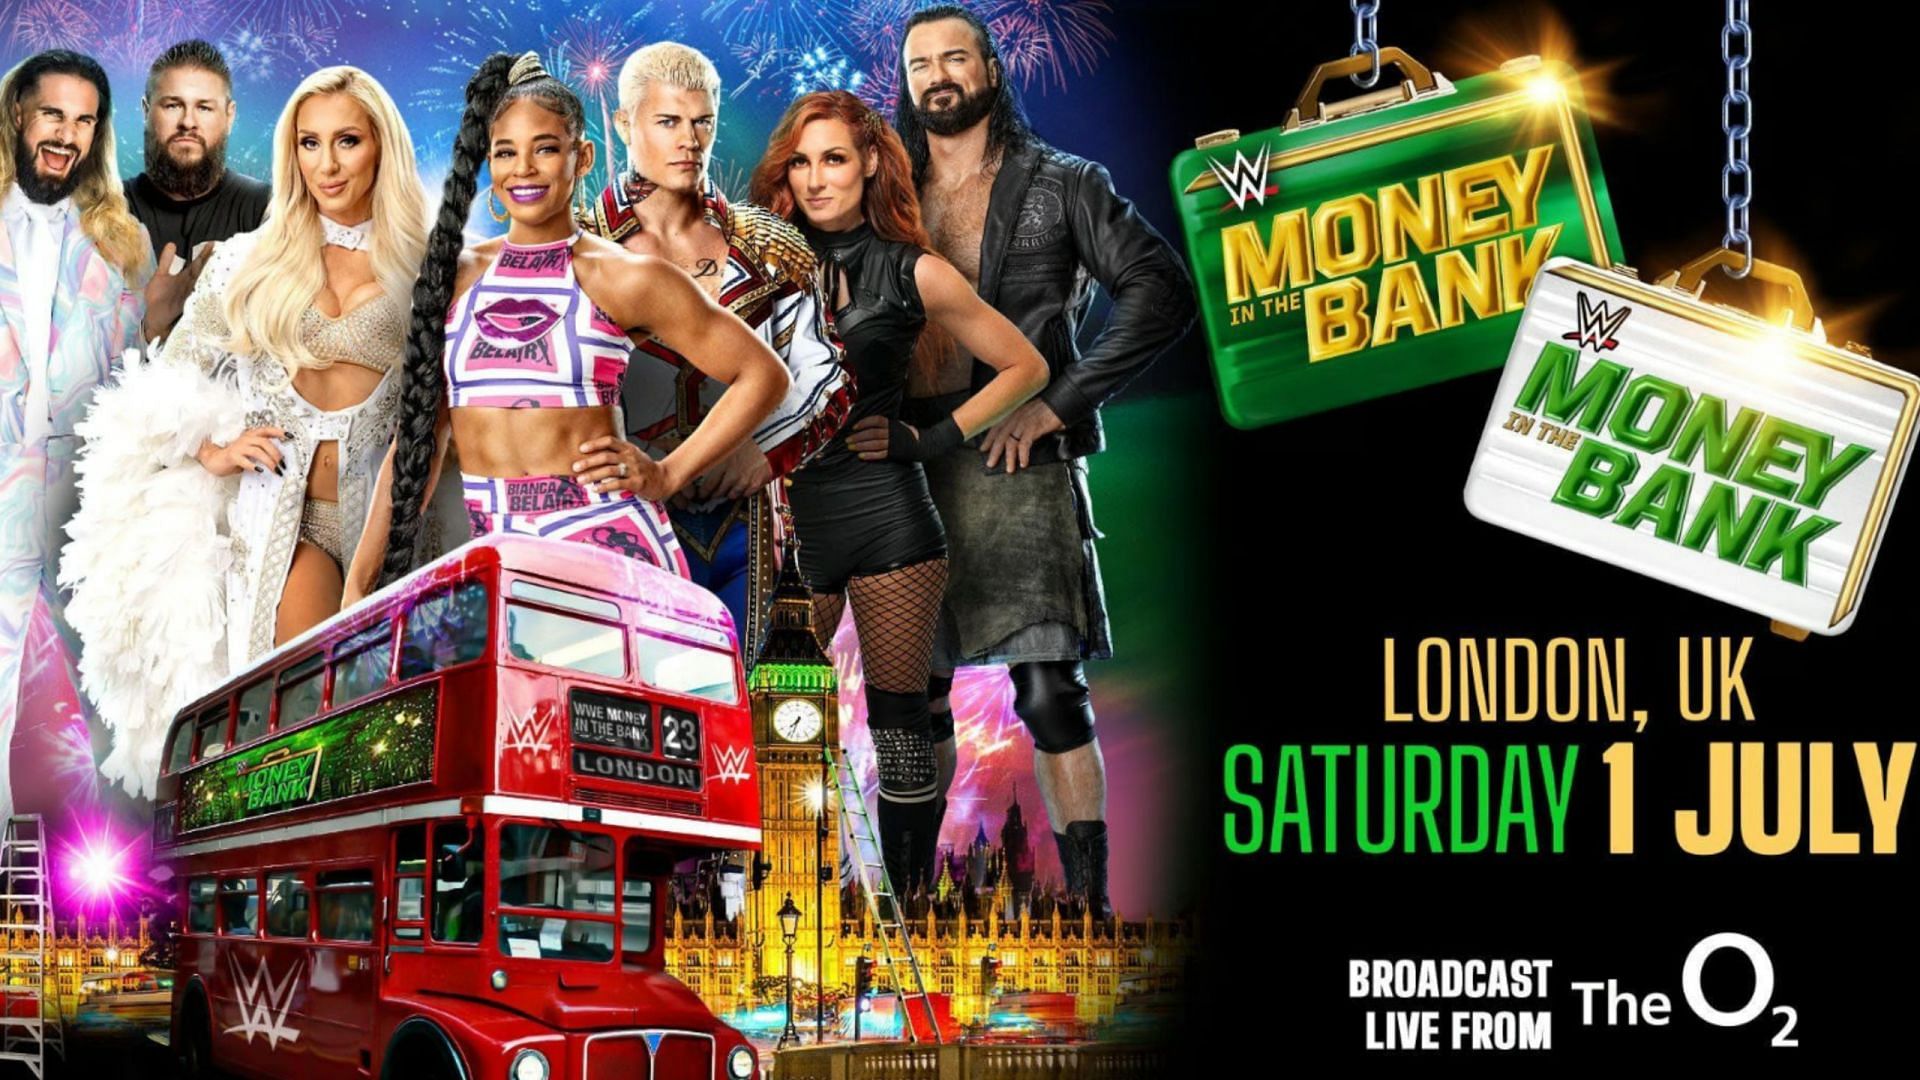 Who will win the Money in the Bank this year?